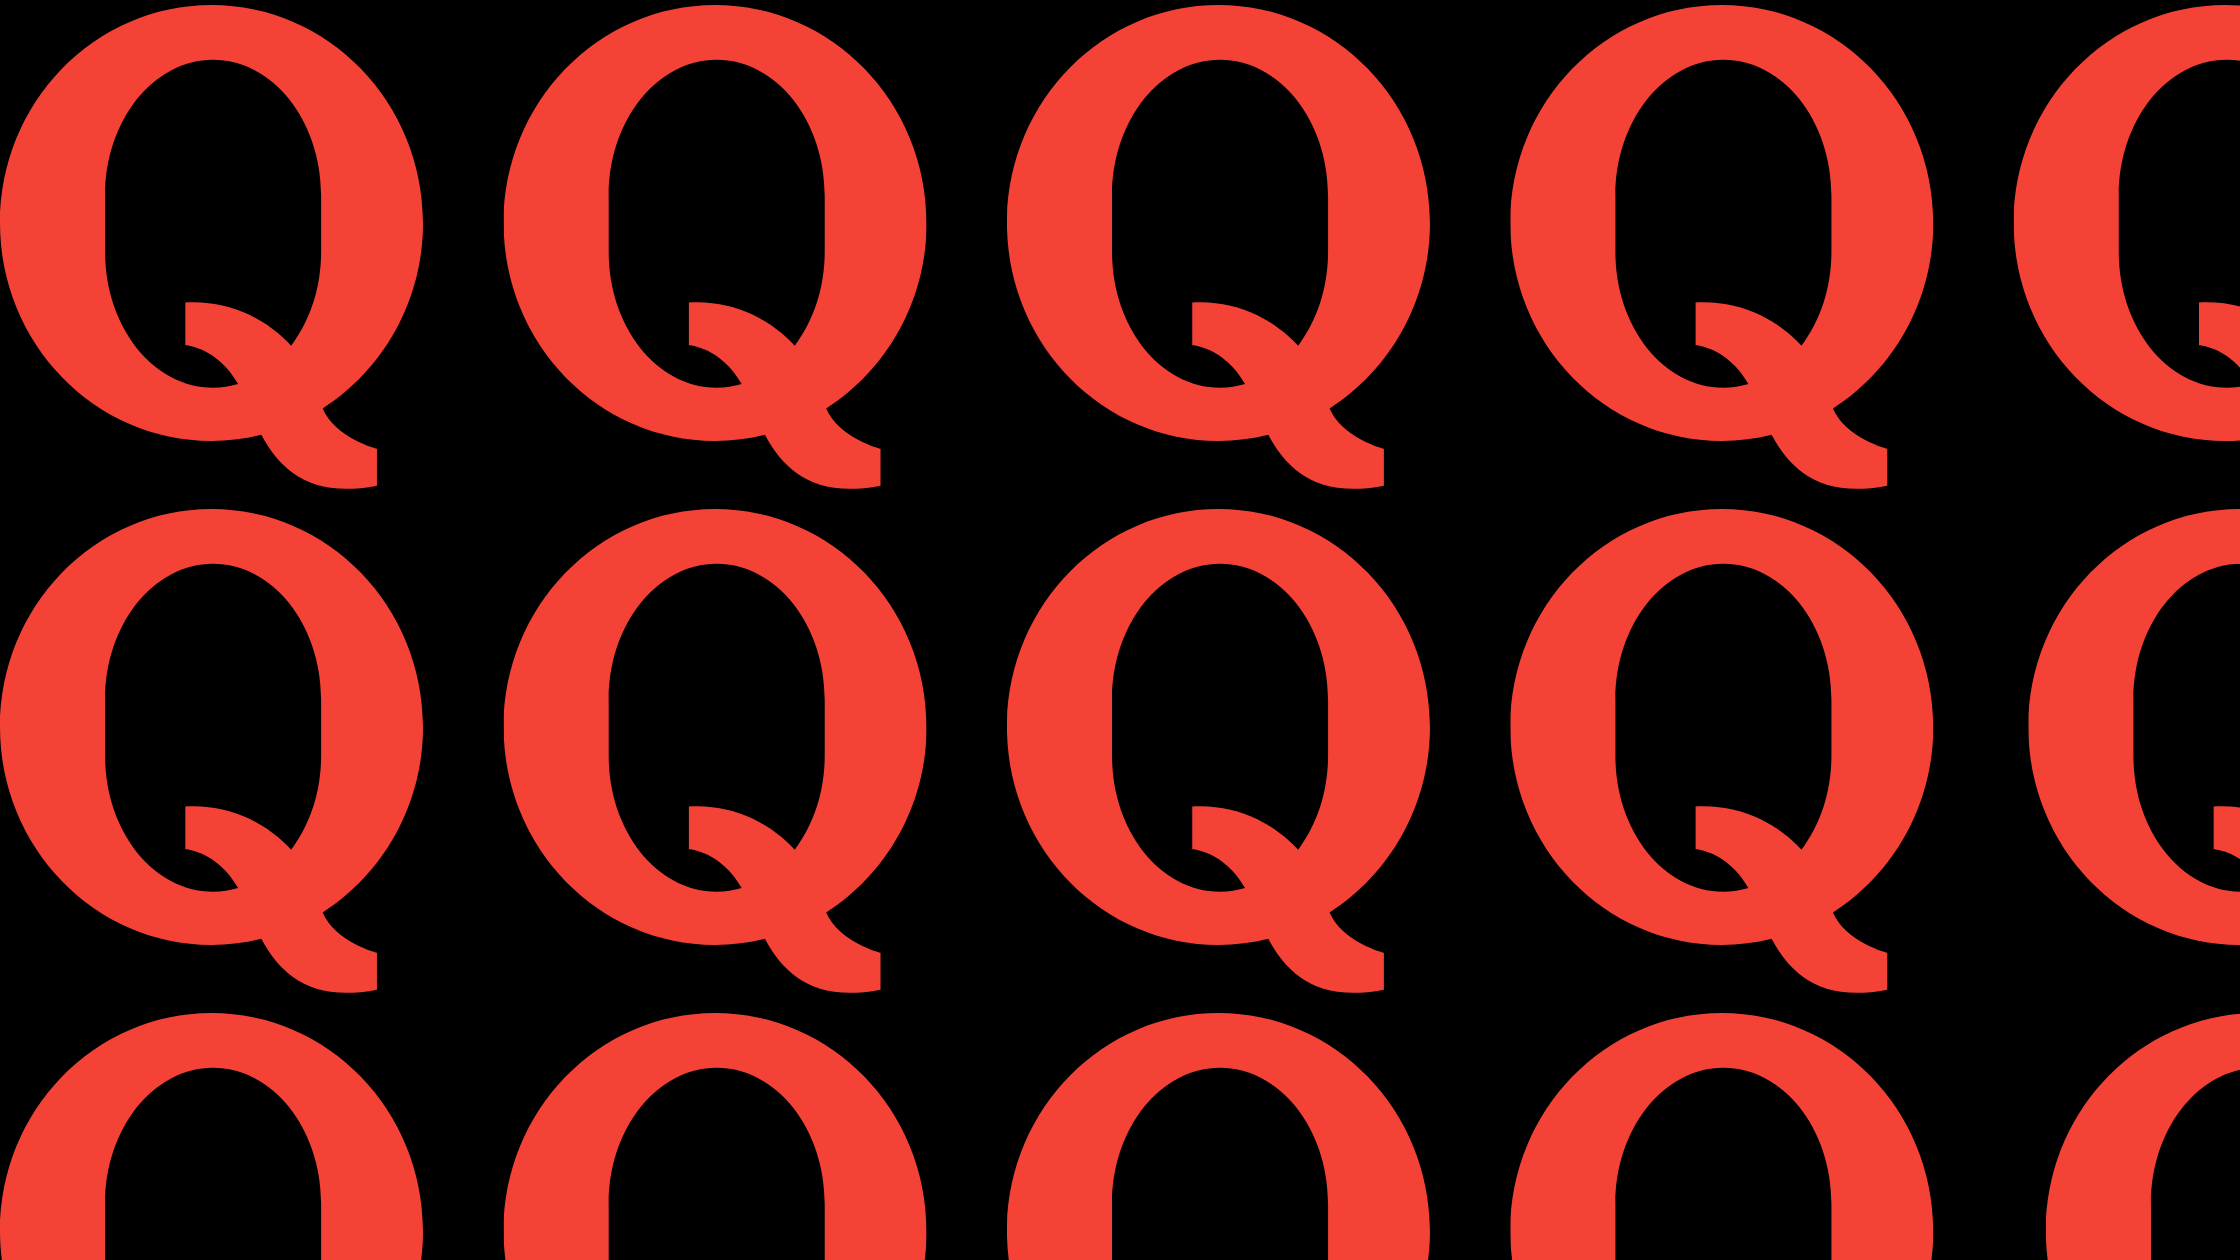 A repeating pattern of the Quora logo, a big red Q